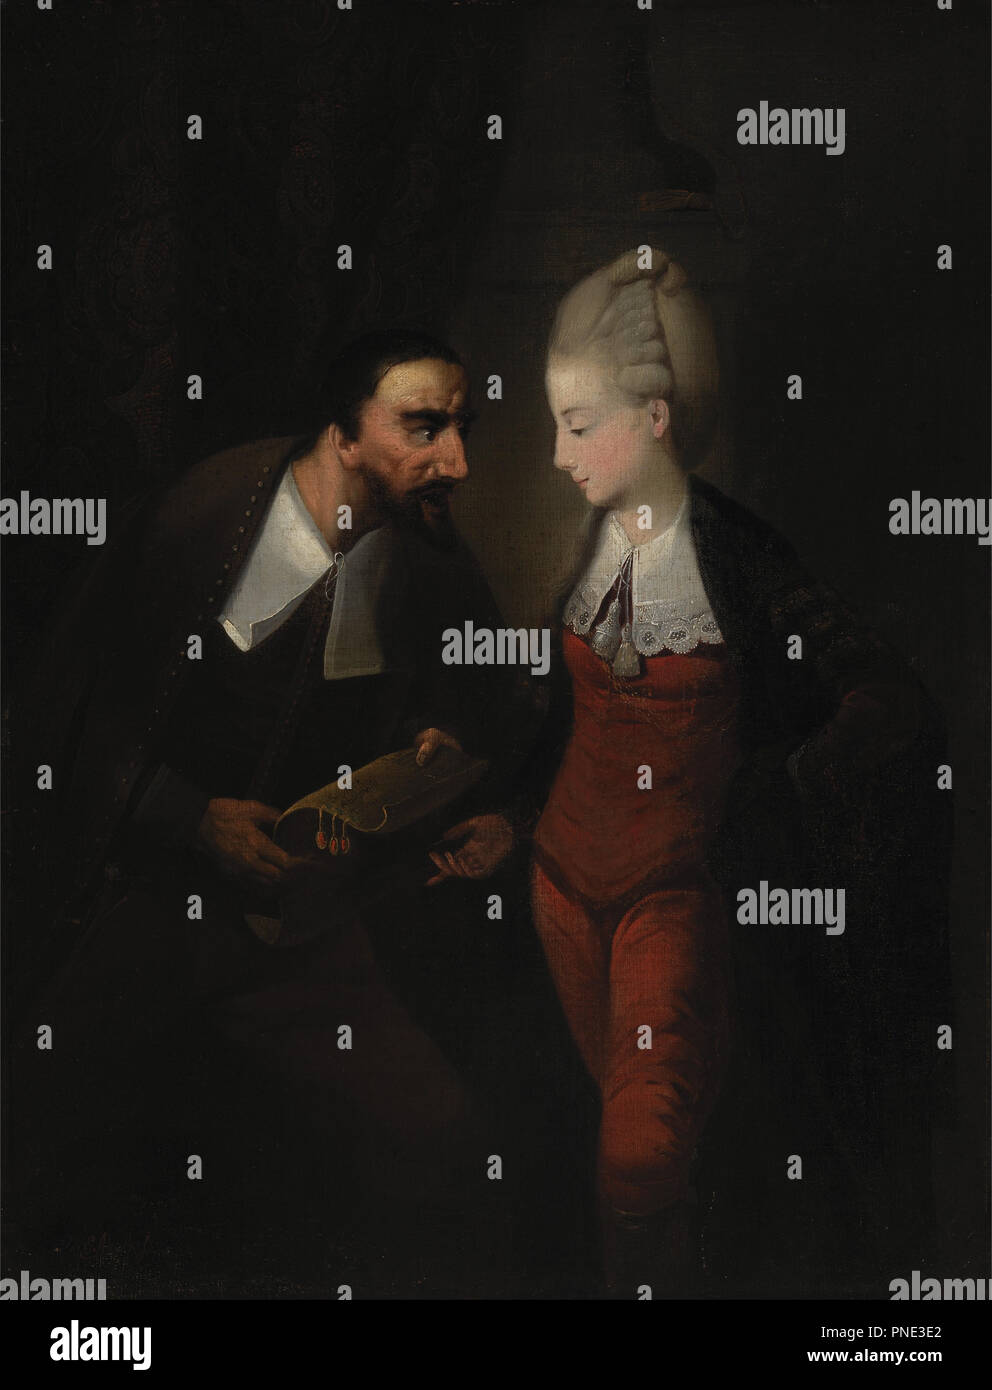 Portia and Shylock, from Shakespeare's 'The Merchant of Venice', IV, i. Date/Period: Ca. 1778. Painting. Oil on canvas. Height: 660 mm (25.98 in); Width: 508 mm (20 in). Author: Edward Alcock. Stock Photo